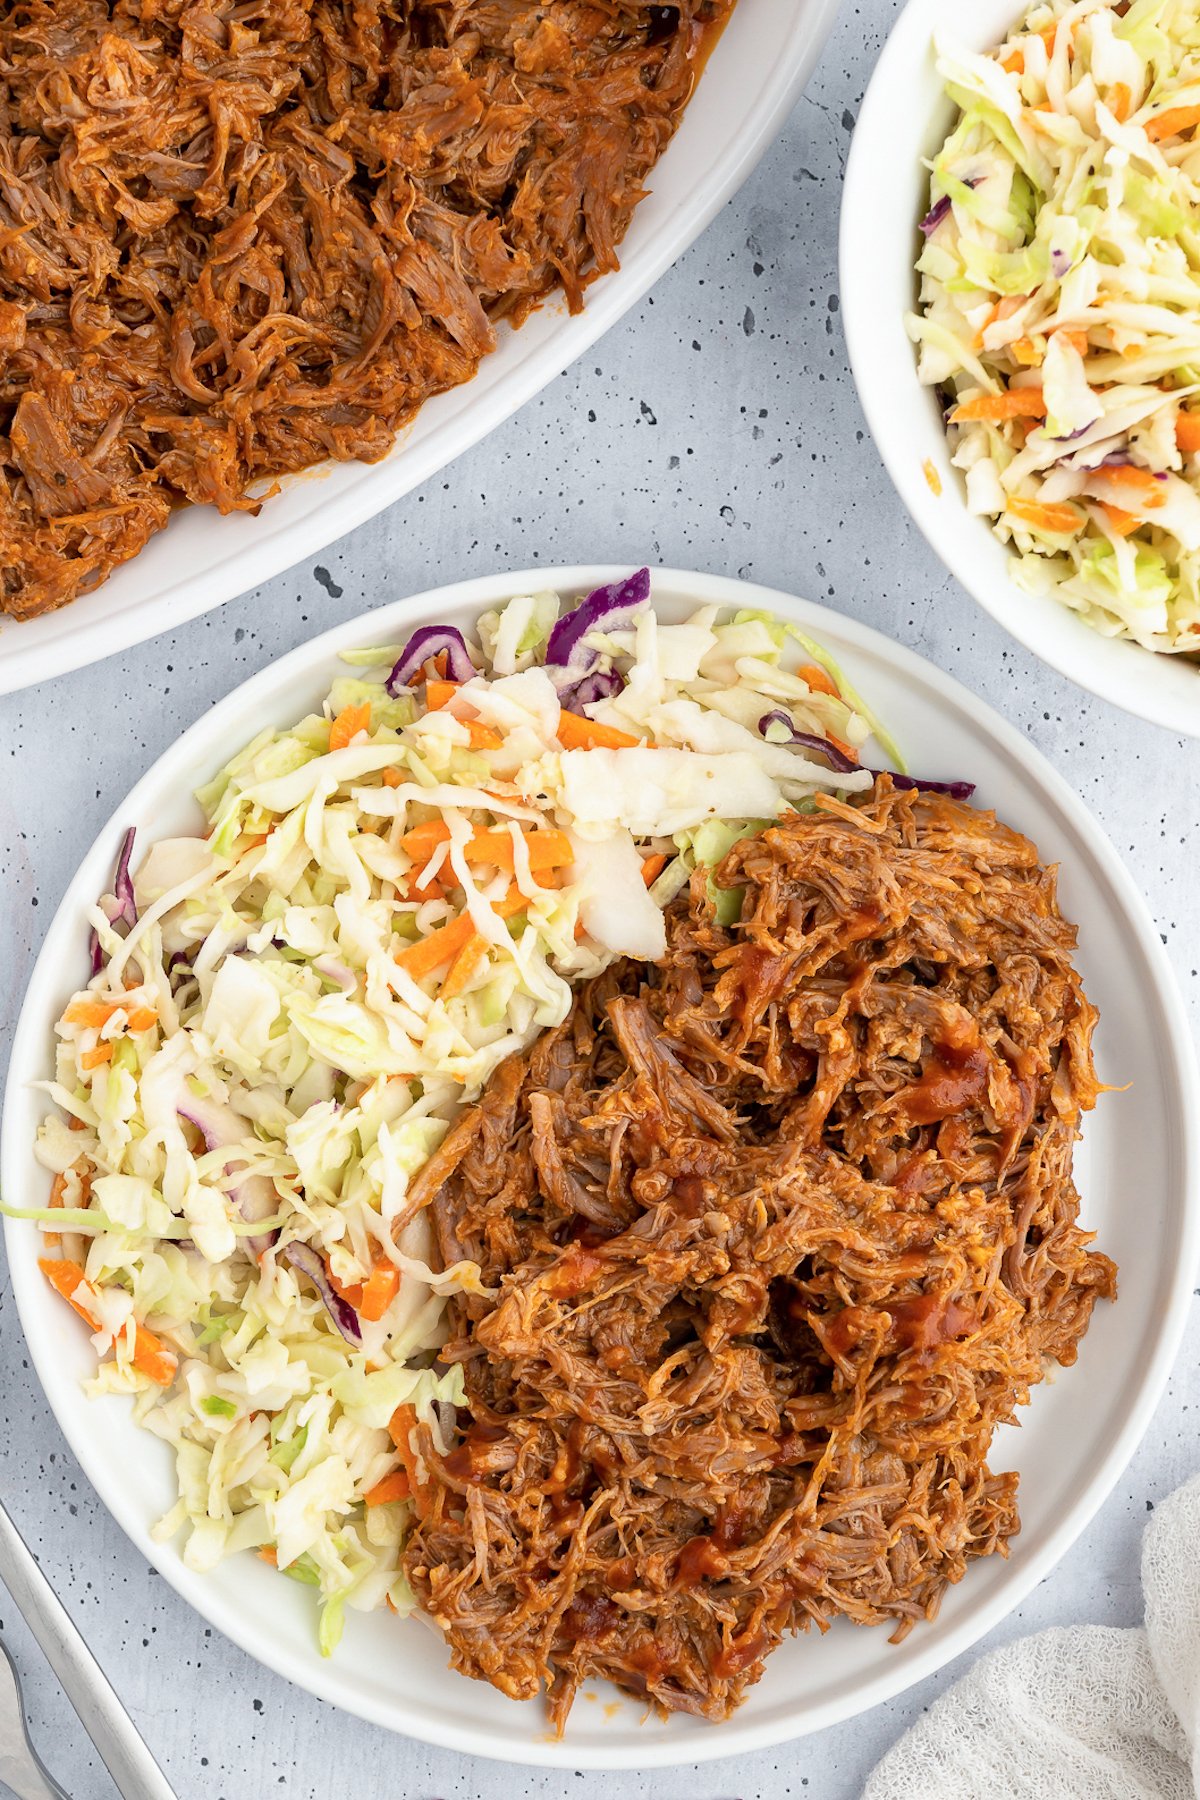 Pulled pork covered in bbq sauce and coleslaw on a dinner plate.